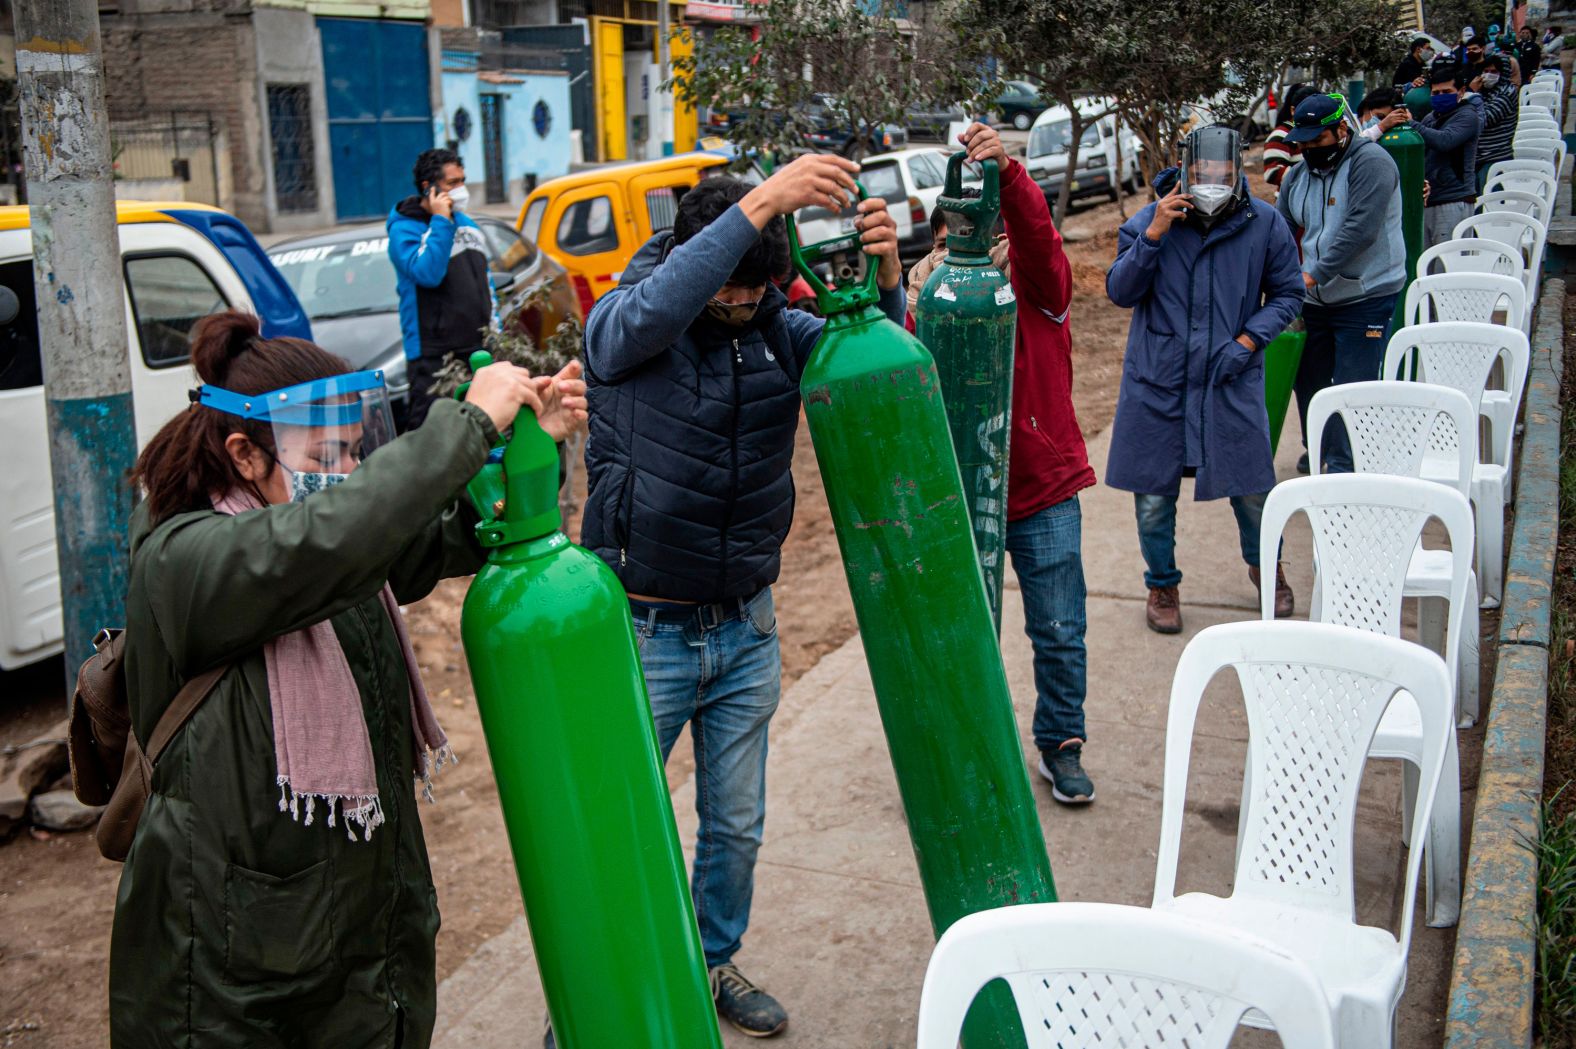 Relatives of Covid-19 patients line up to recharge oxygen cylinders in Villa Maria del Triunfo, Peru, on July 29.